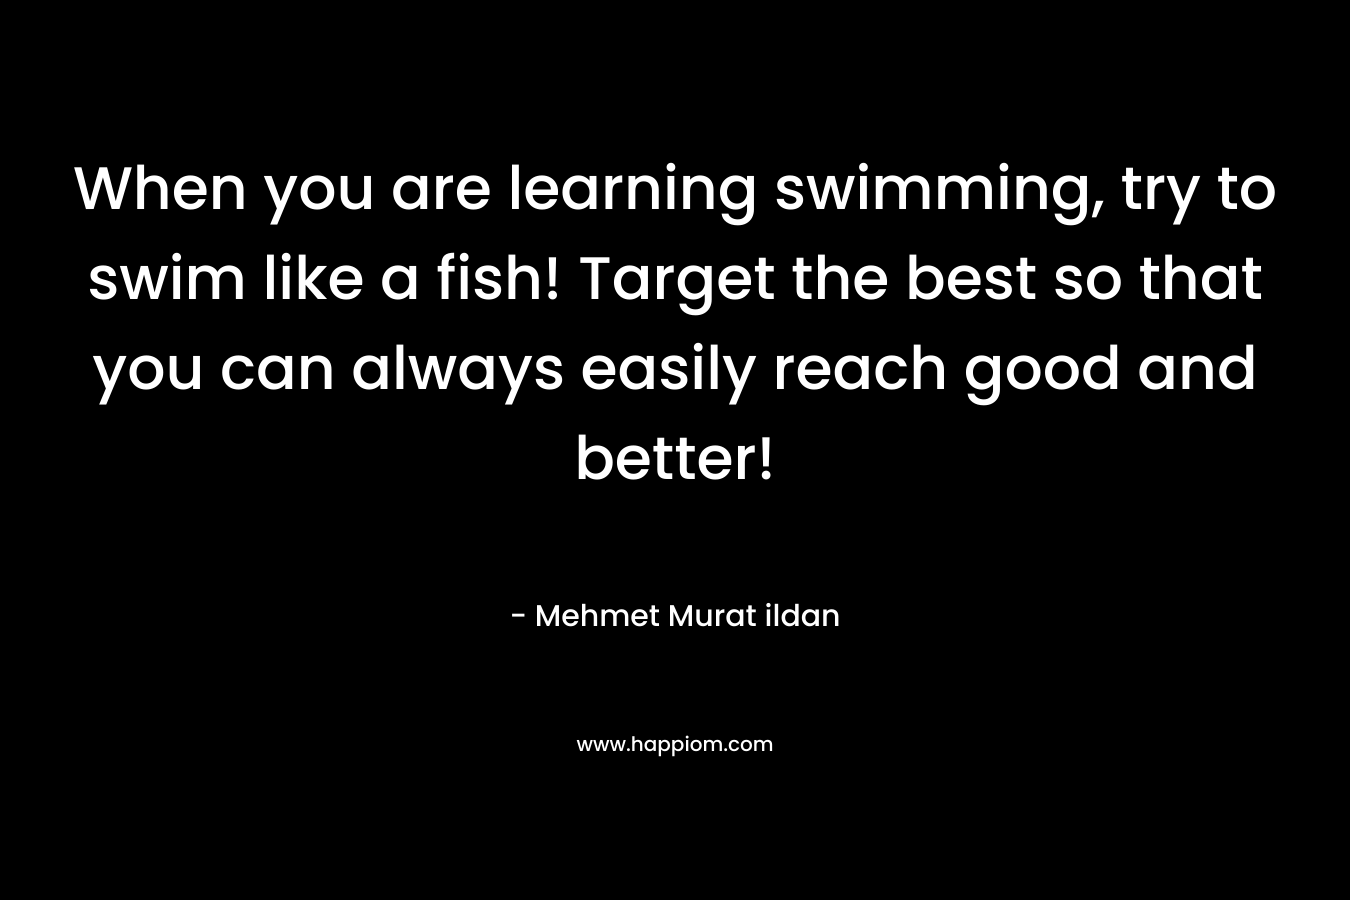 When you are learning swimming, try to swim like a fish! Target the best so that you can always easily reach good and better! – Mehmet Murat ildan